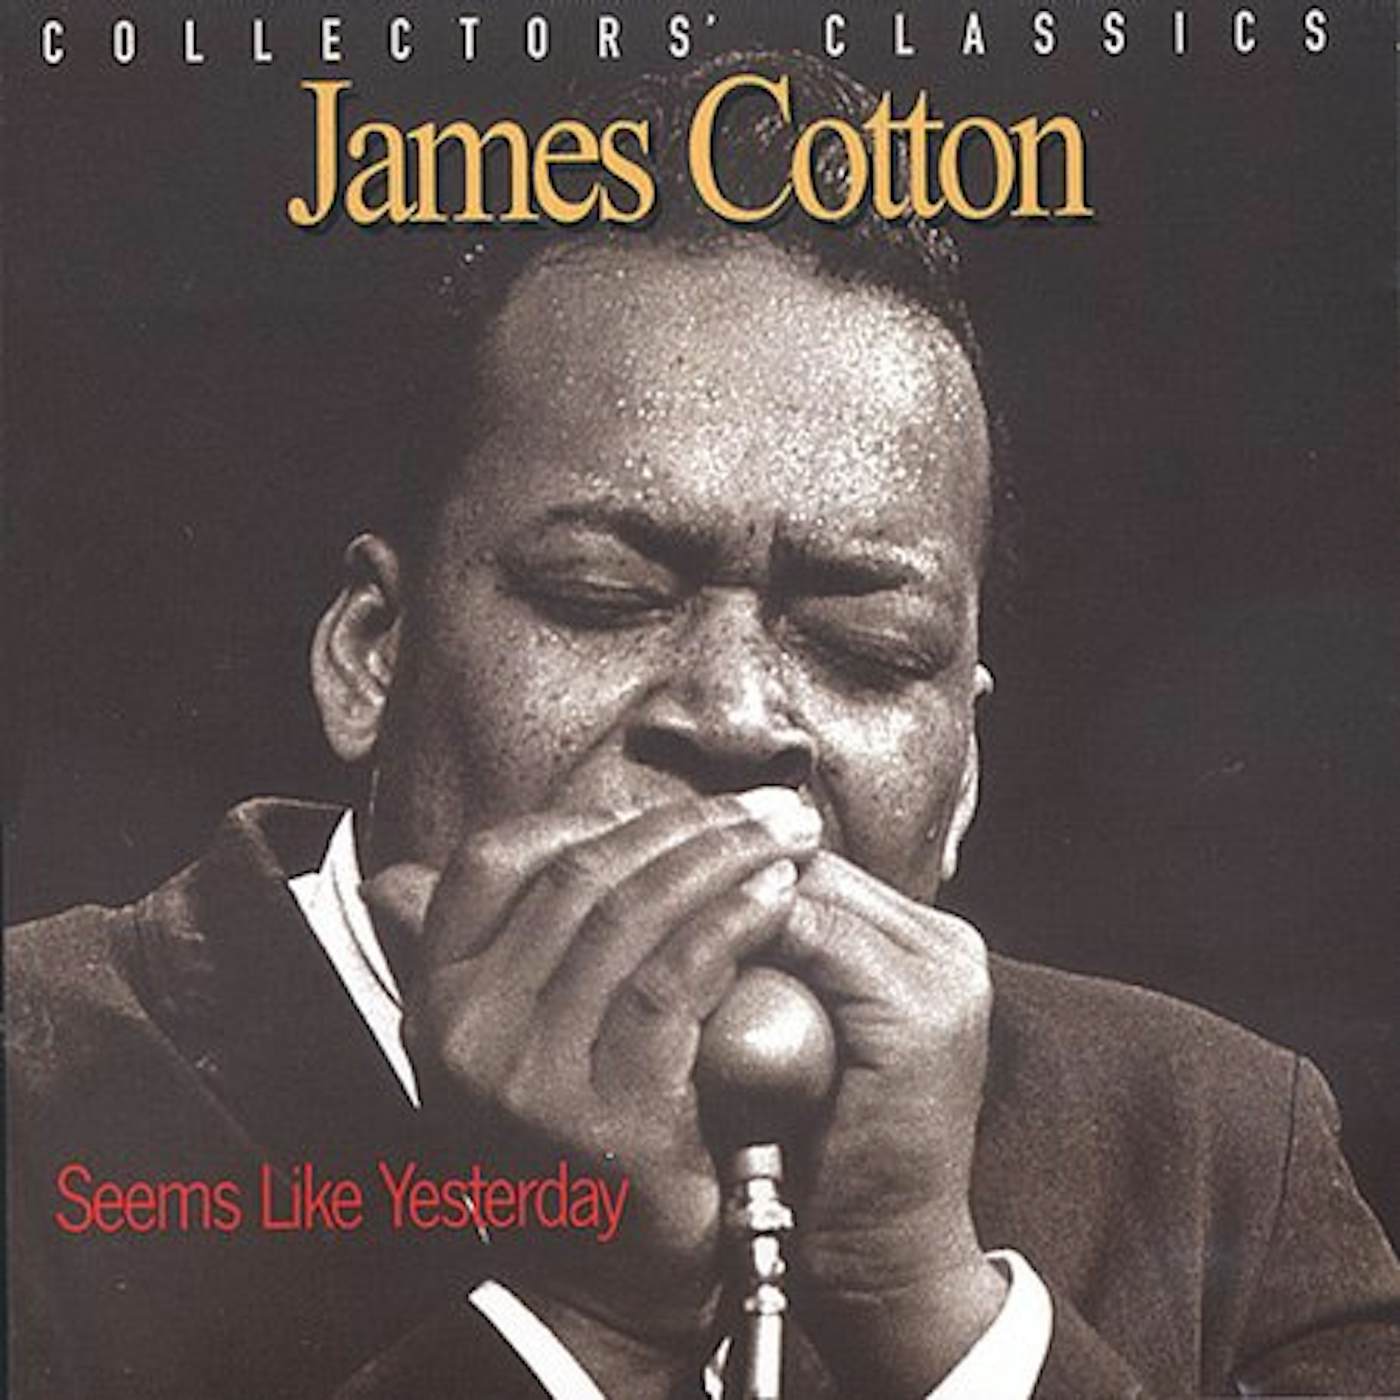 James Cotton SEEMS LIKE YESTERDAY - COLLECTORS CLASSICS CD